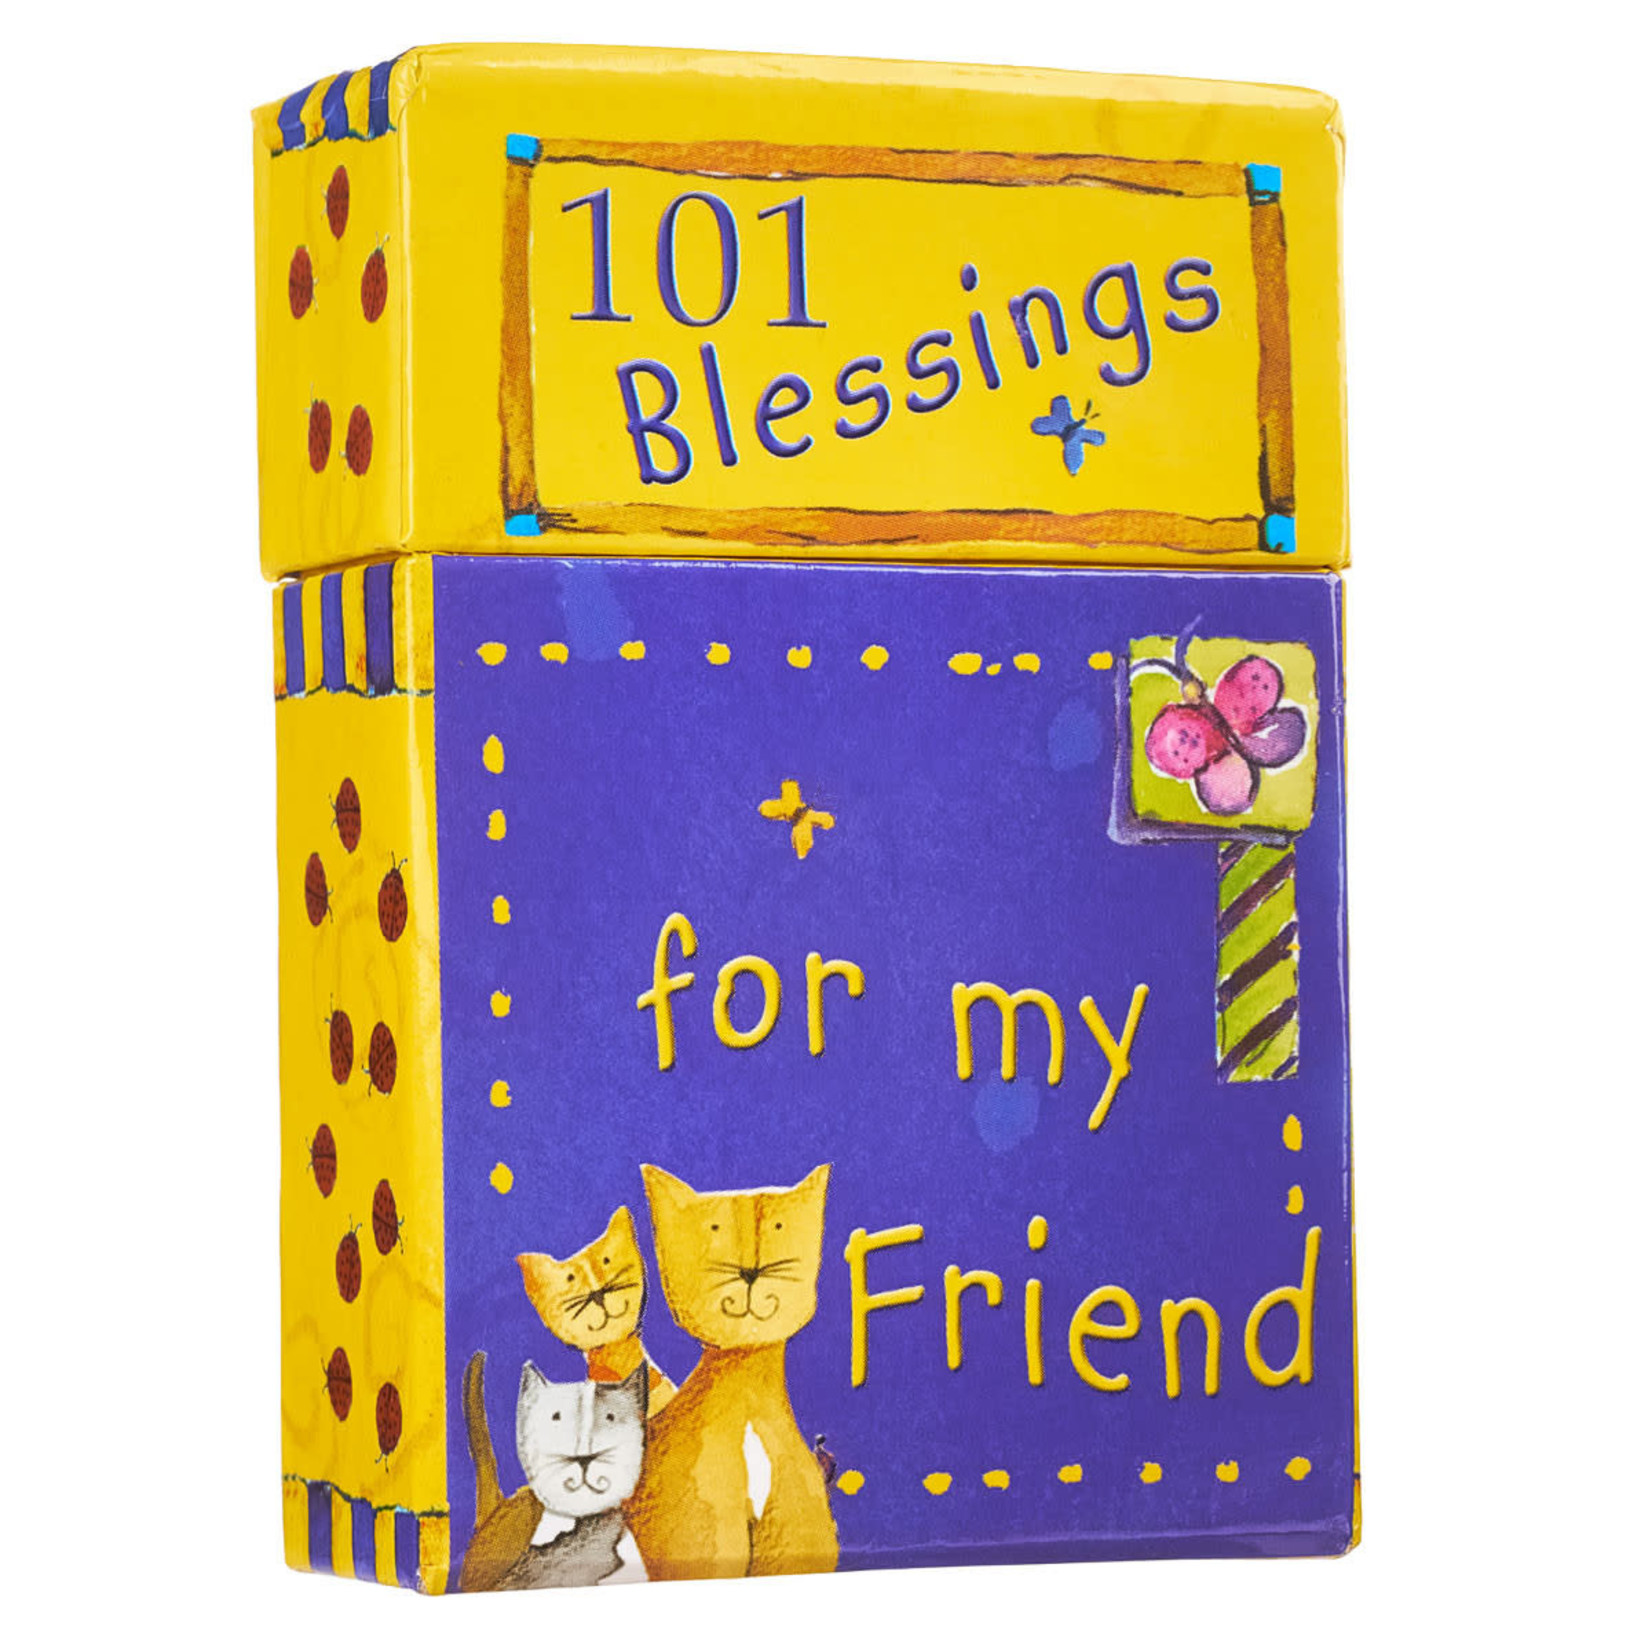 Christian Art Gifts 101 Blessings for My Friend Box of Blessings